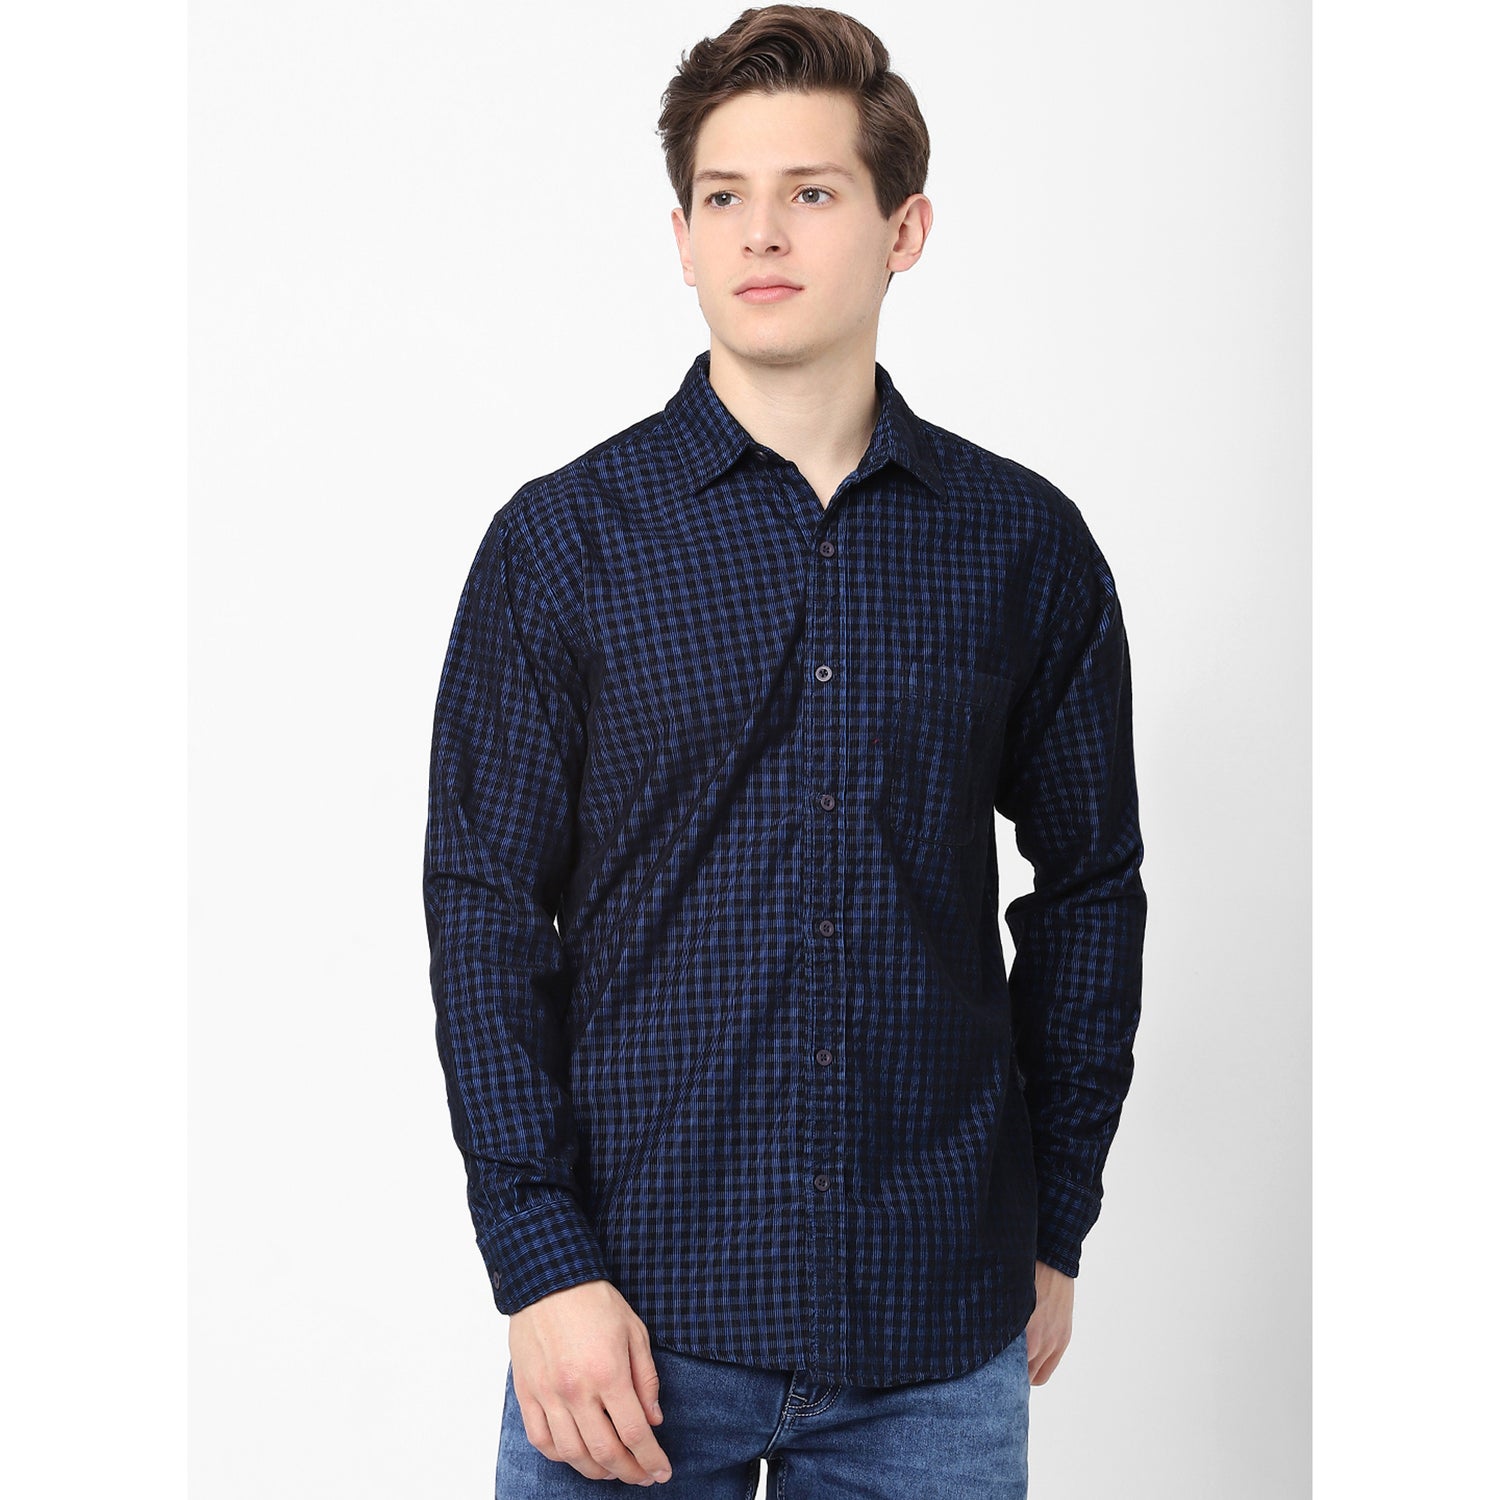 Blue and Black Slim Fit Checked Cotton Casual Shirt (BACORD3)